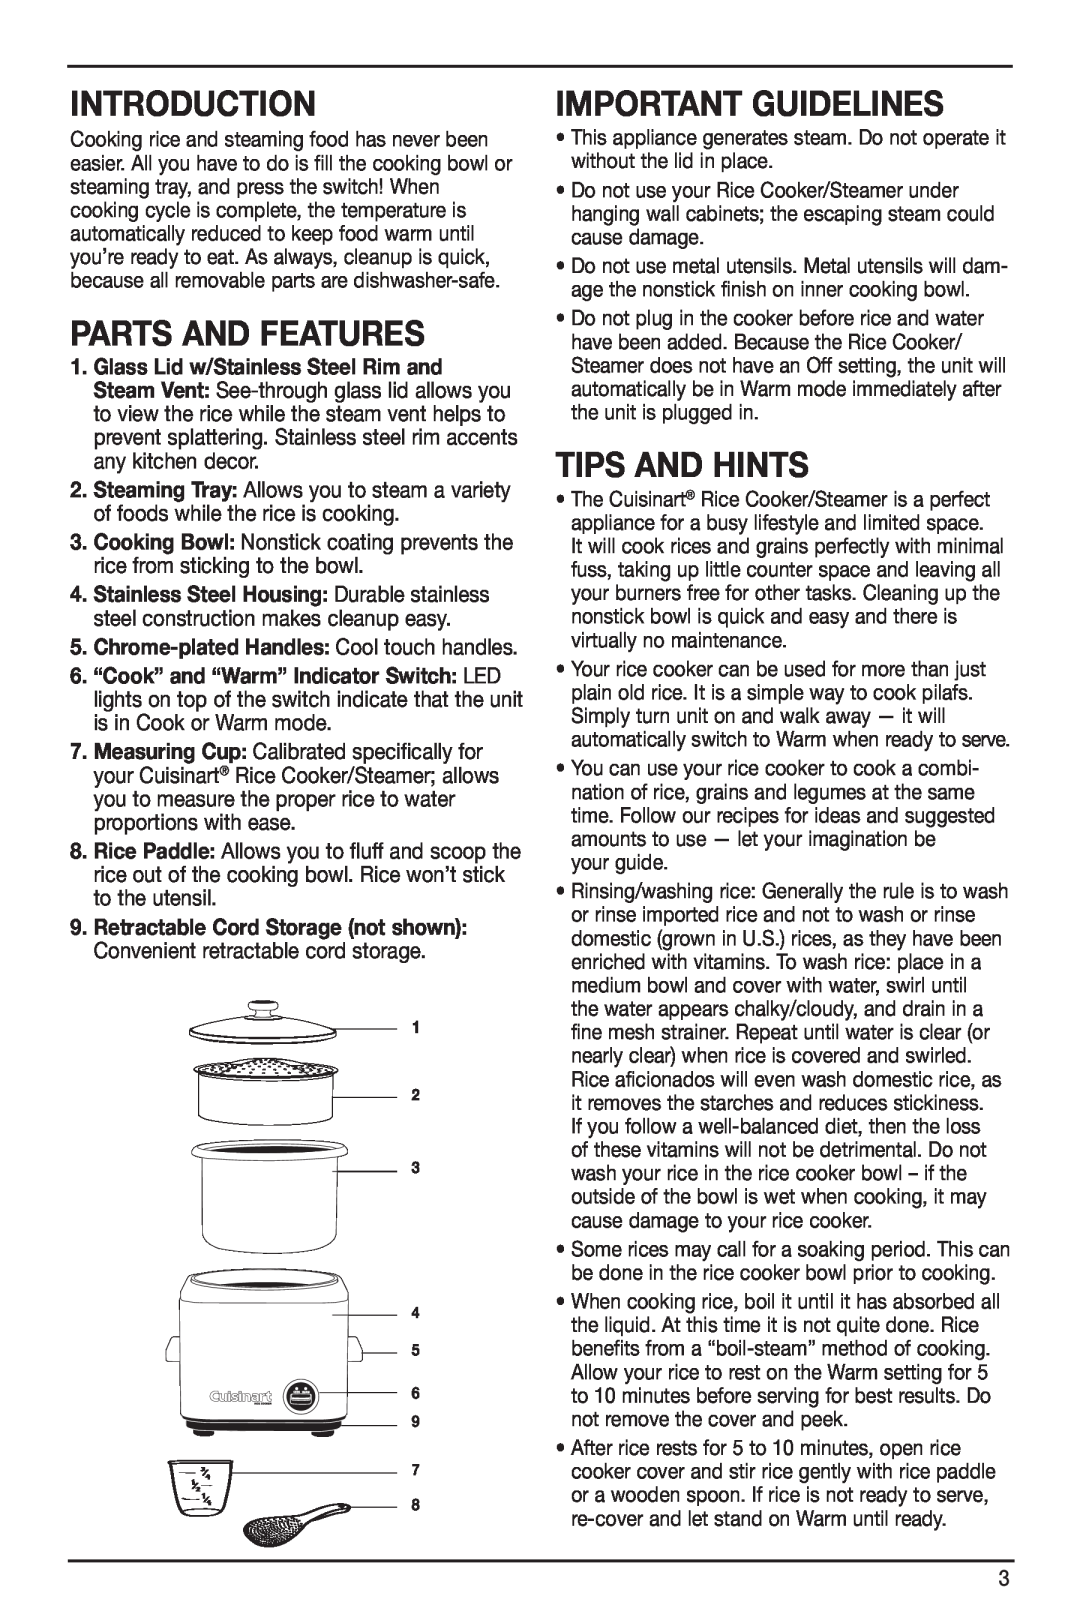 Cuisinart IB-4932B manual introduction, imPORTANT GUIDELINES, Parts And Features, Tips And Hints 